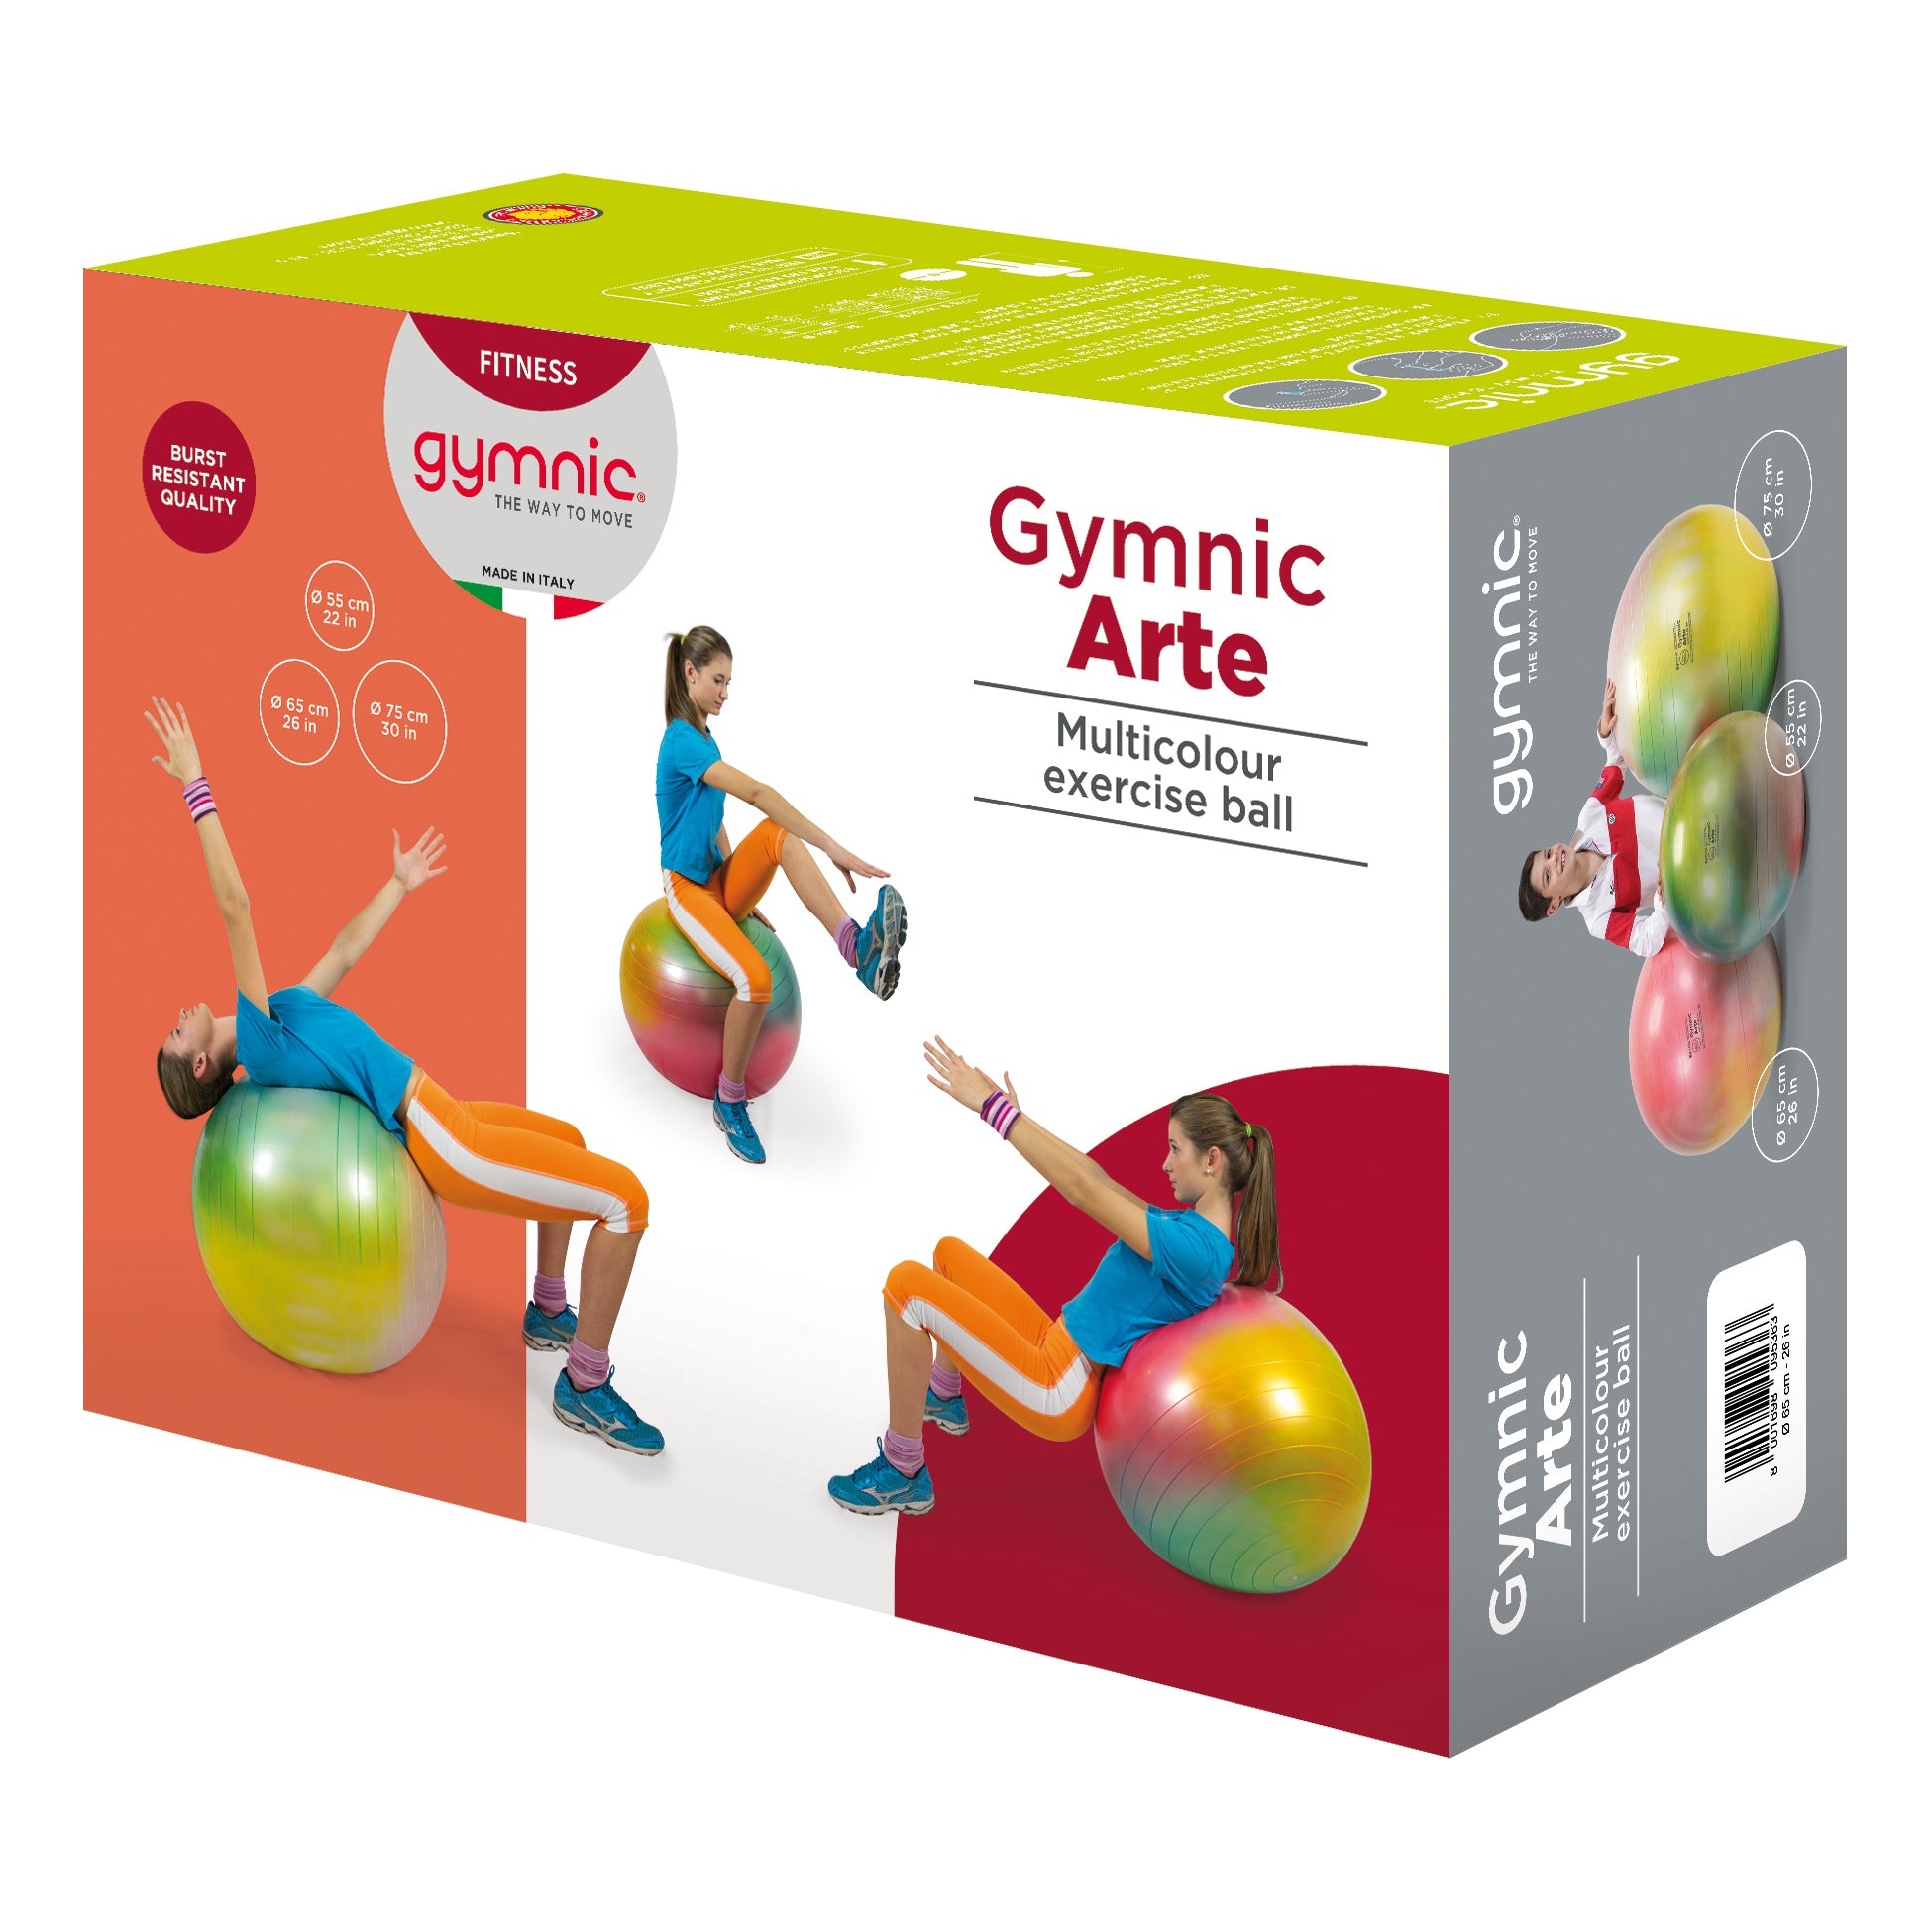 Gymnic Arte BRQ Physiotherapy & Fitness Balls